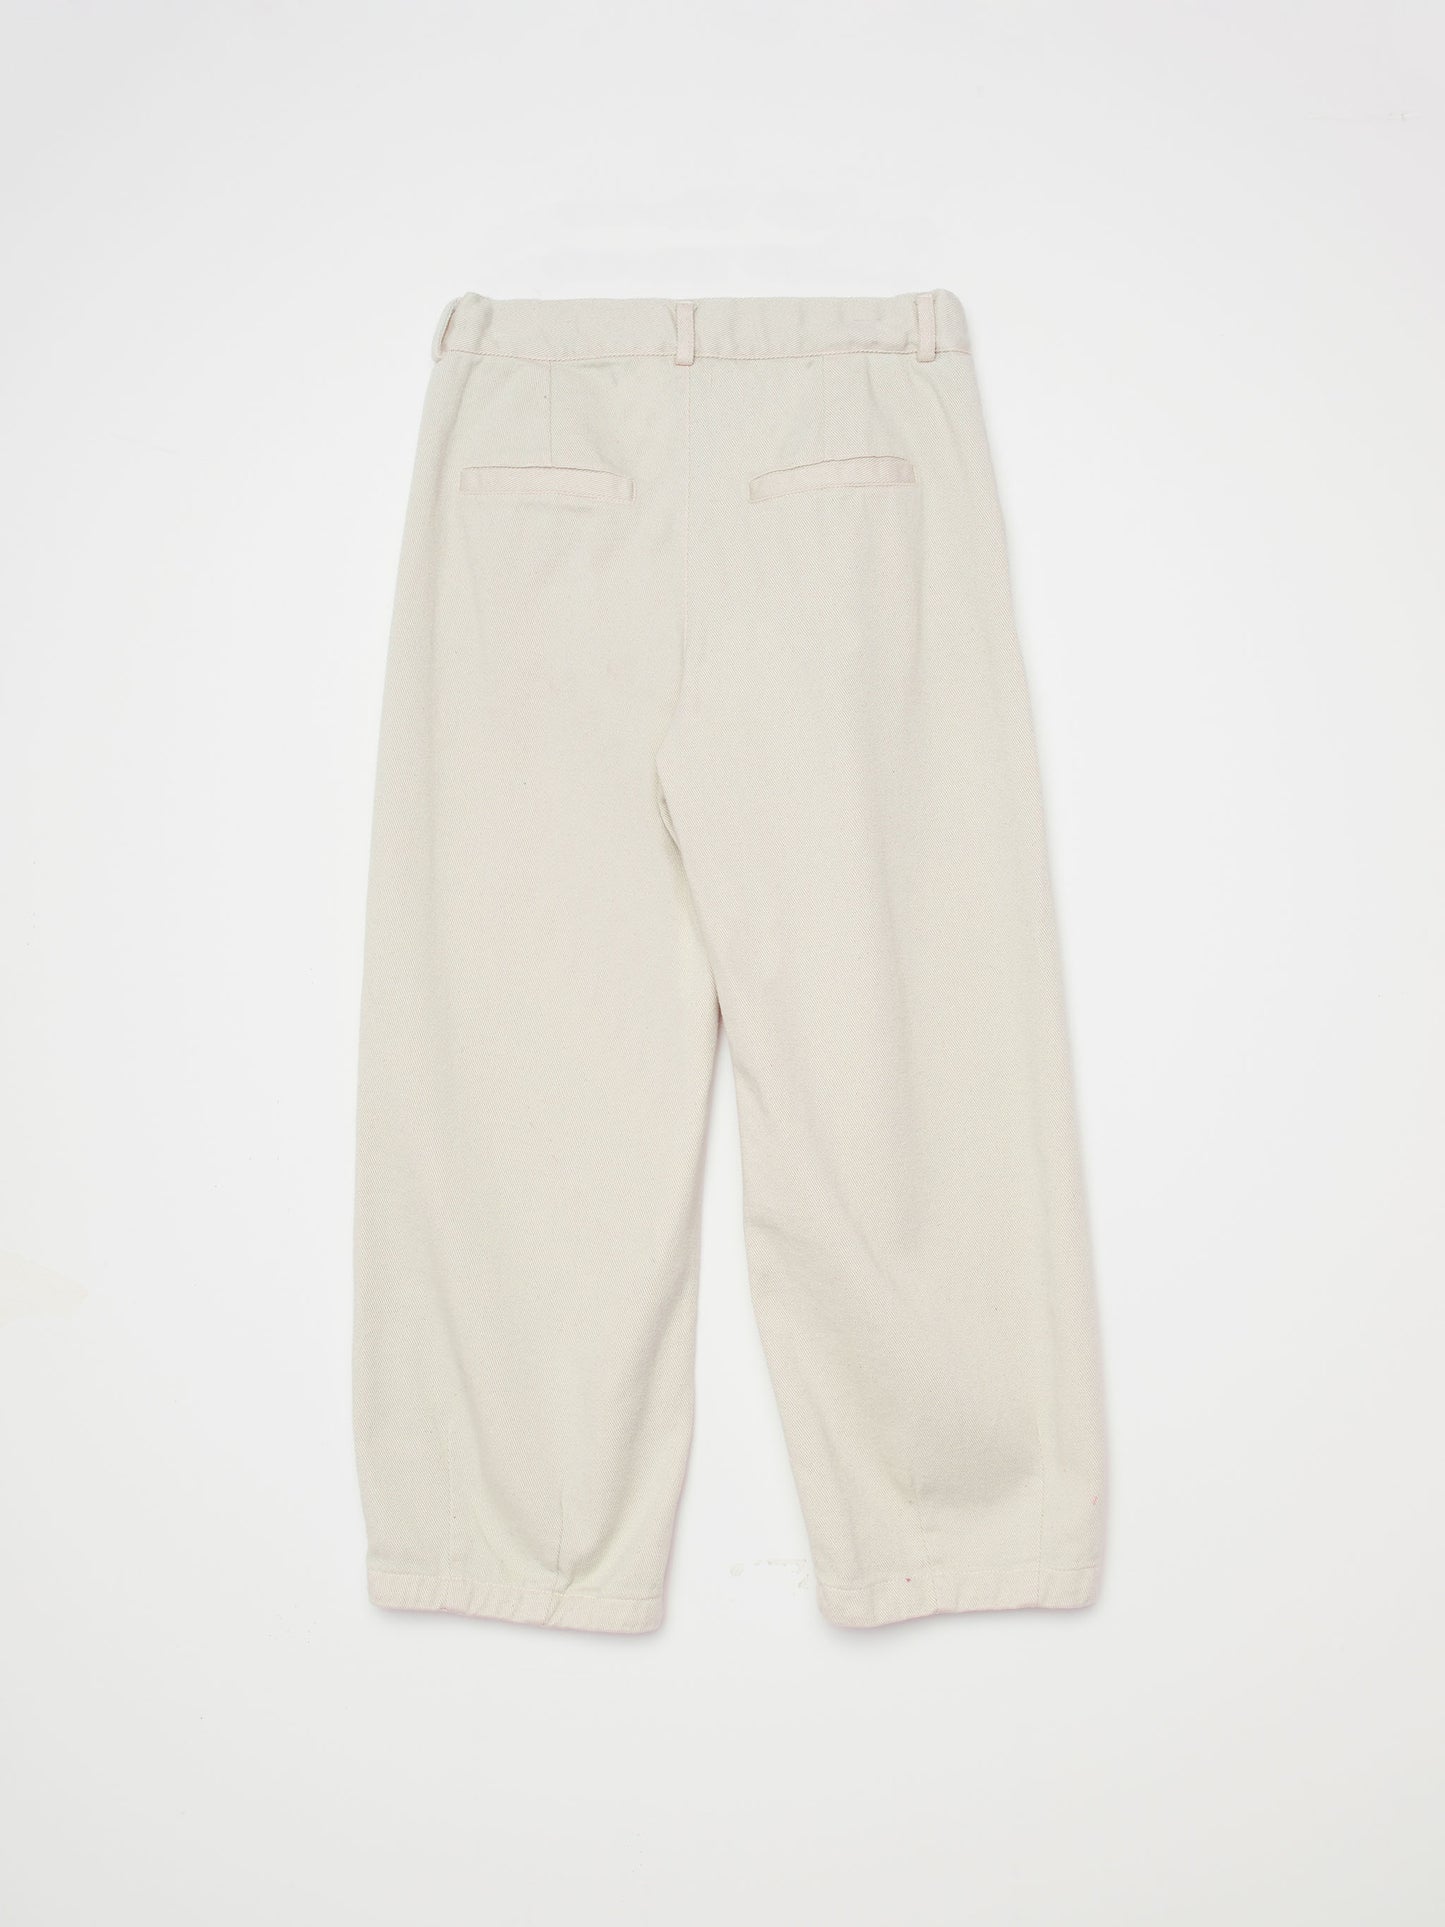 Trousers nº01 Marble White